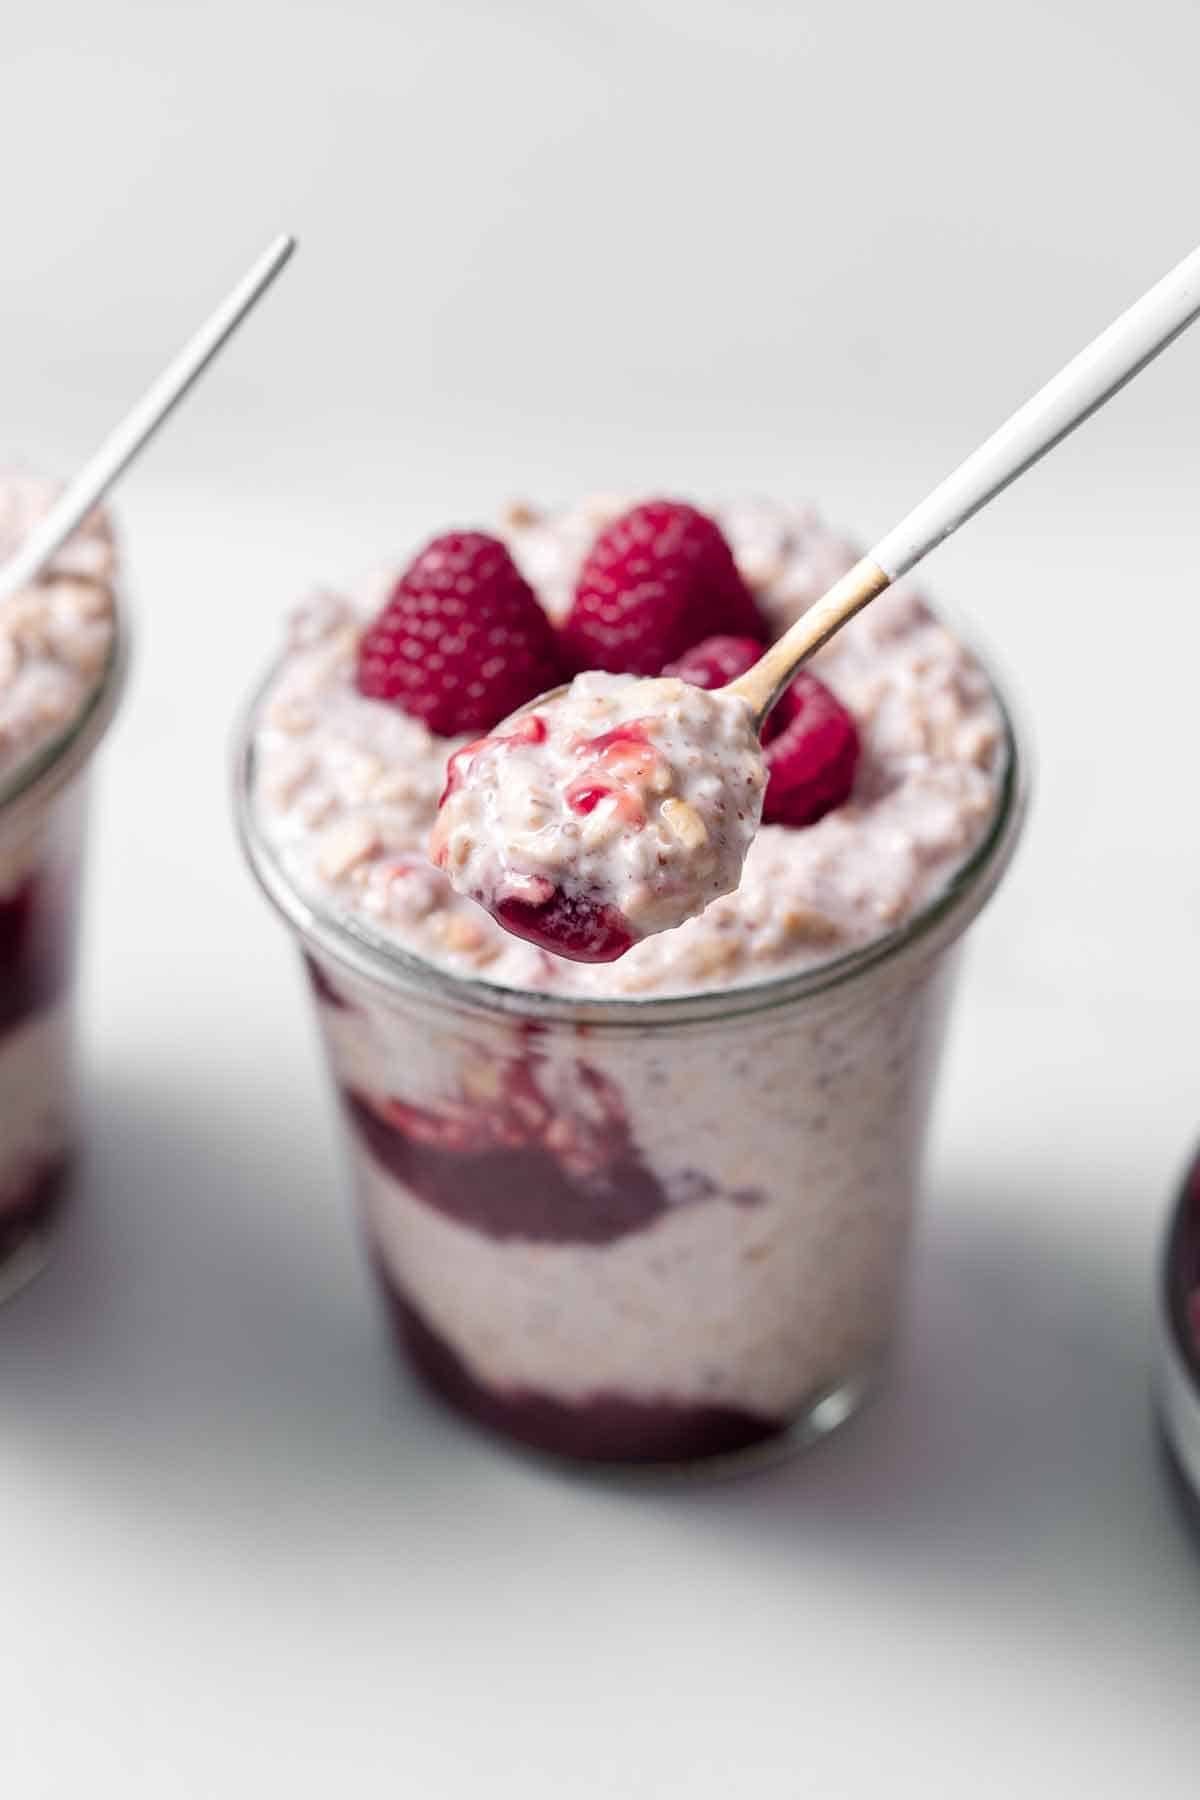 A spoonful of overnight oats without chia seeds in front of a jar of overnight oats topped with raspberries.